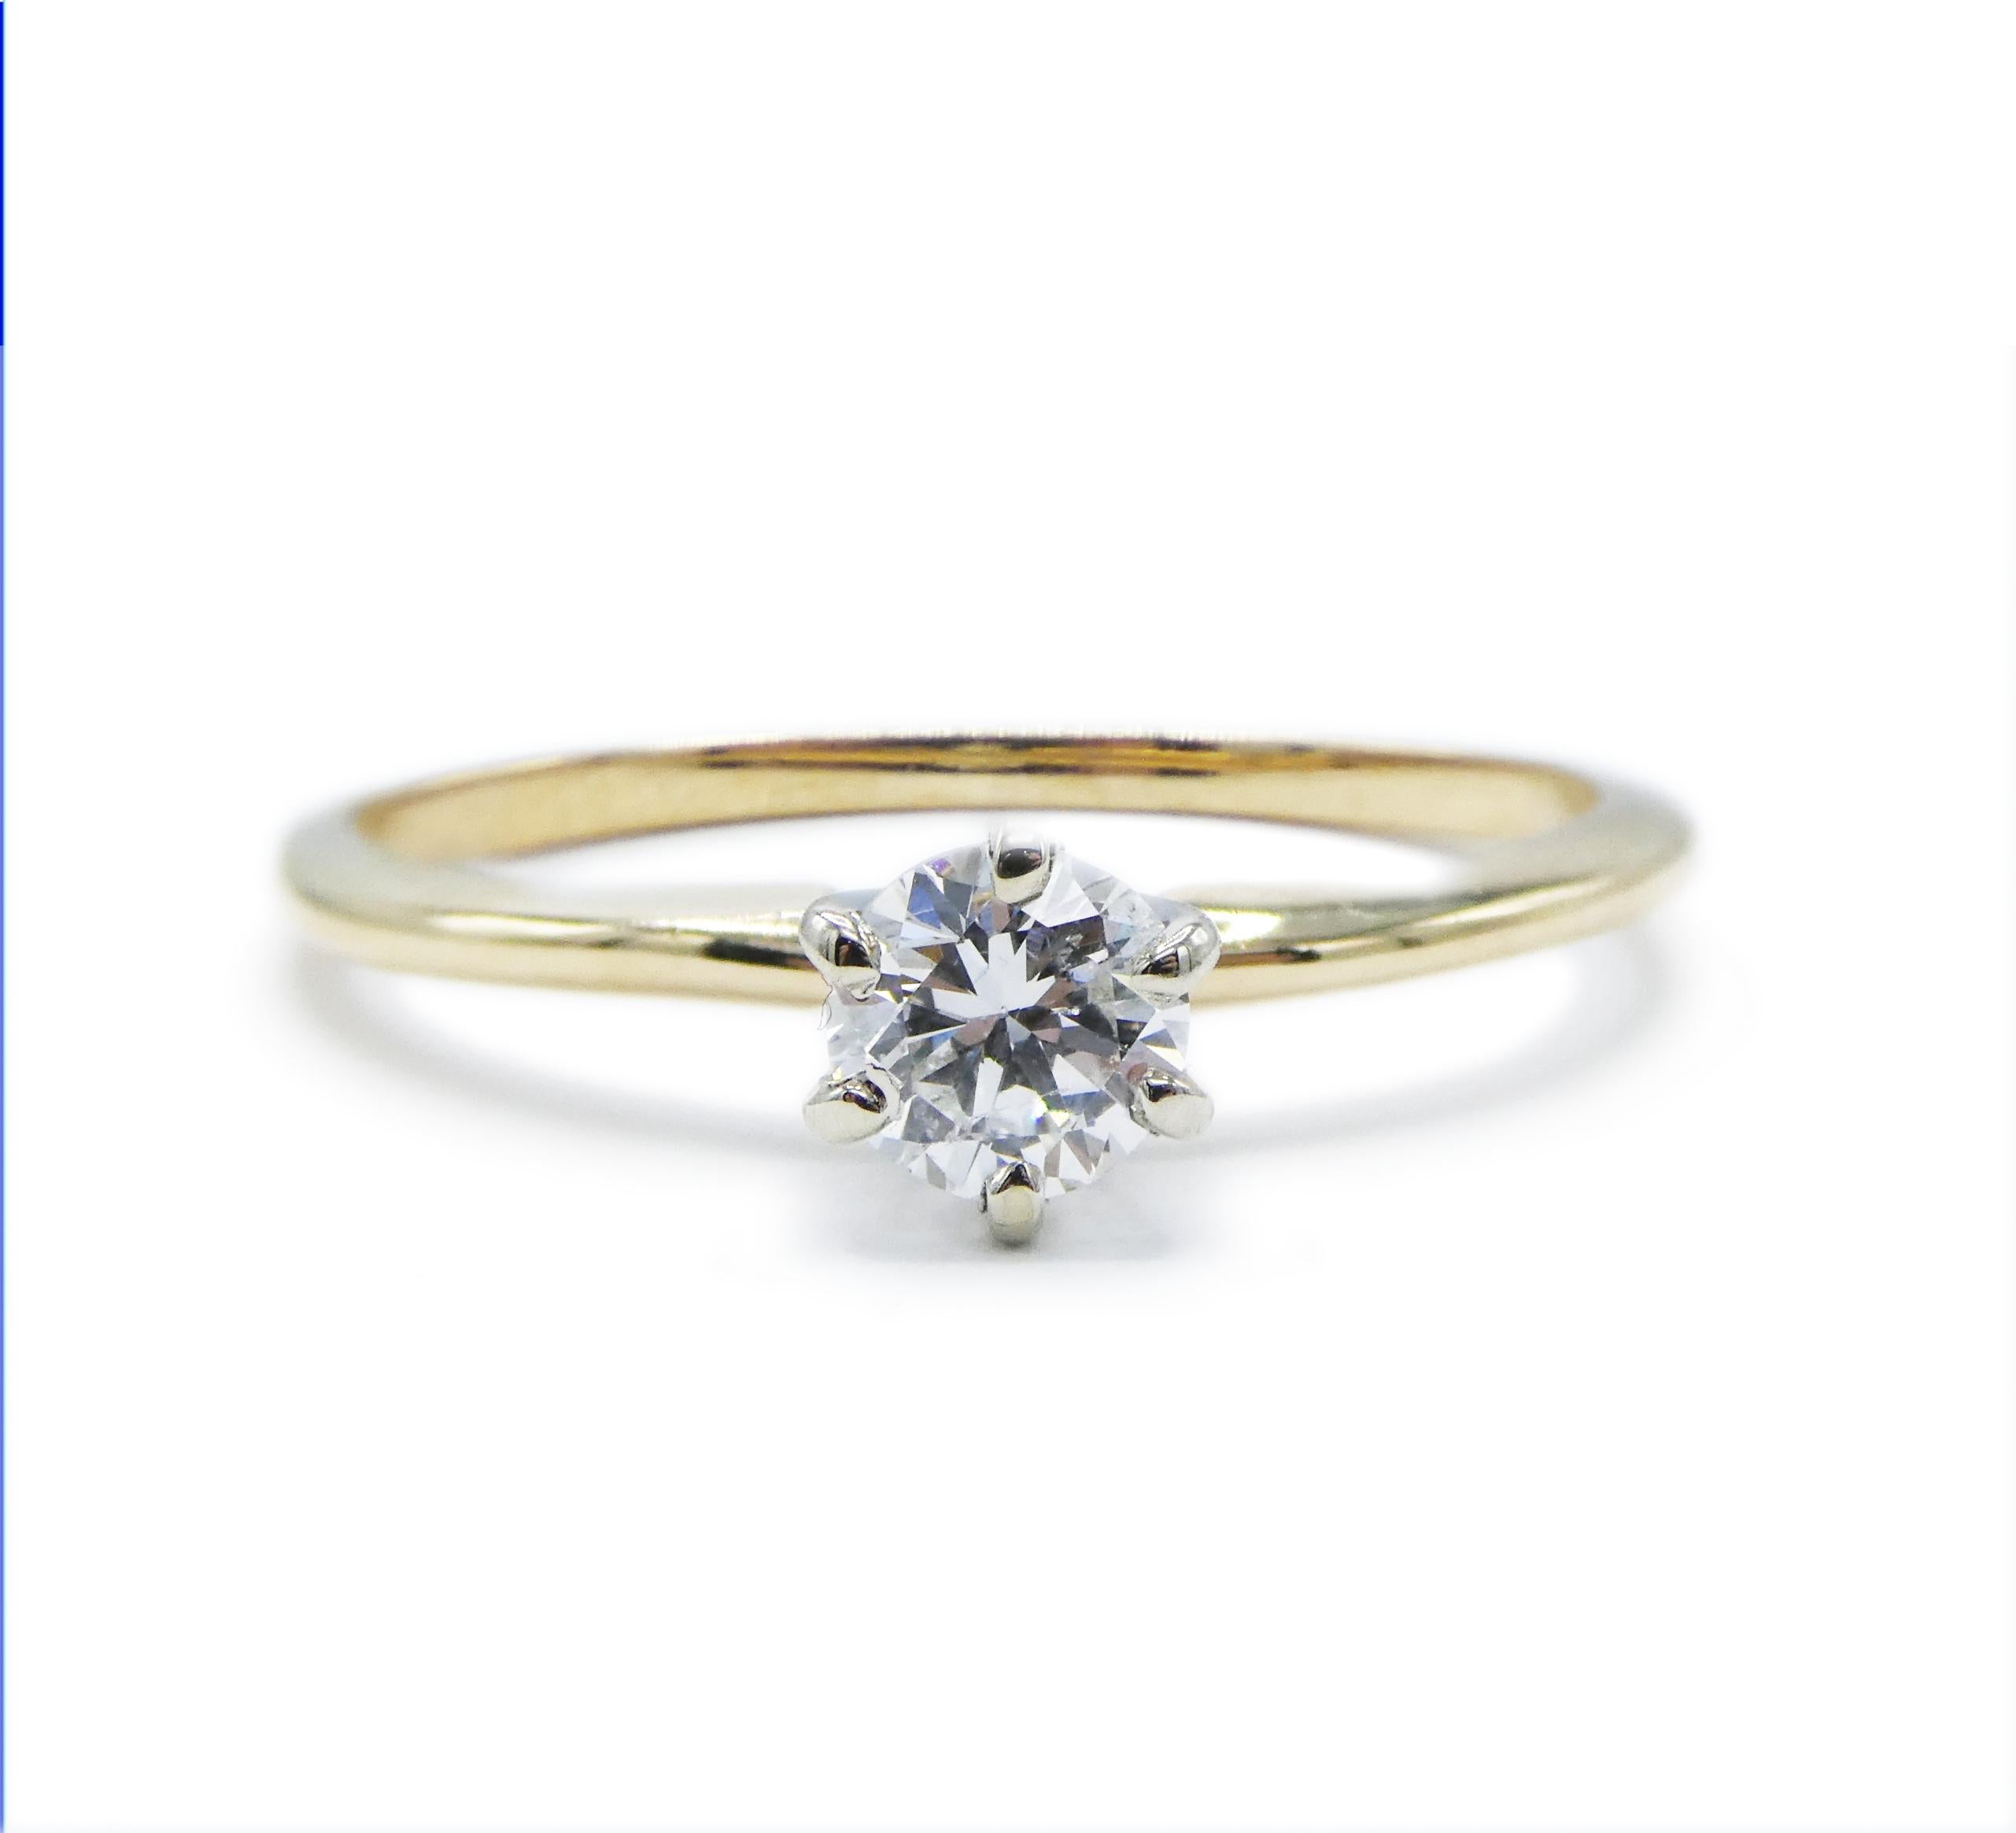 0.25ct Round Brilliant Cut Solitaire Diamond Engagement Ring 14k Yellow Gold 6-Prong Size 5.5

Metal: 14K Yellow Gold with 14k White Gold prongs
Weight: 1.25 grams
Diamond:  .25ct Round Brilliant Cut Diamond Approx. I SI
Ring size: 5.5 (5 1/2)
Band